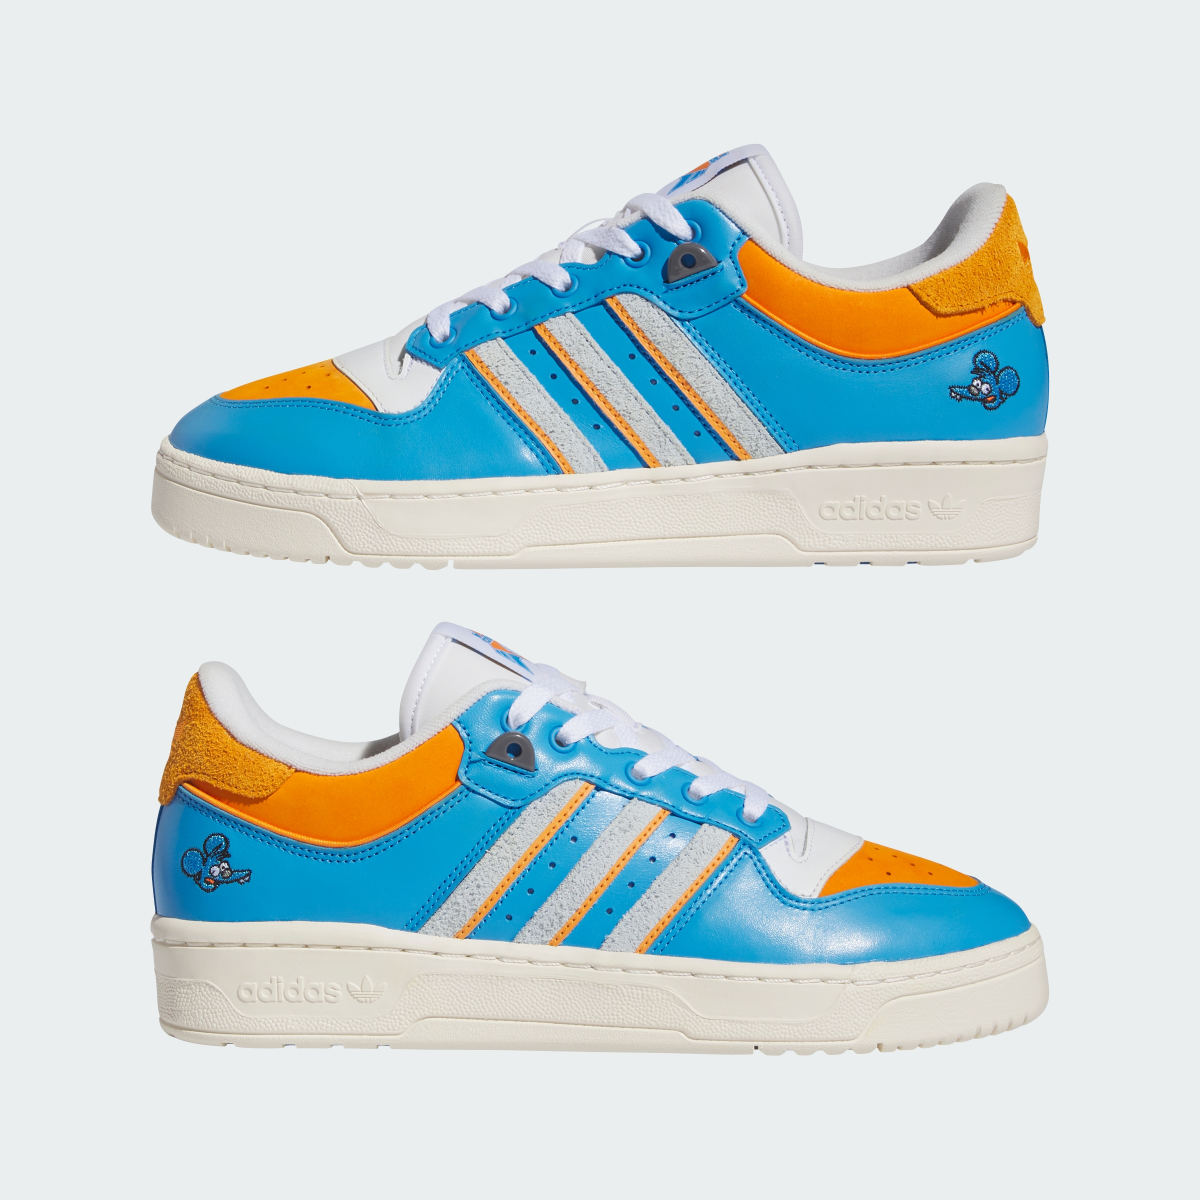 Adidas Rivalry Low Itchy. 10